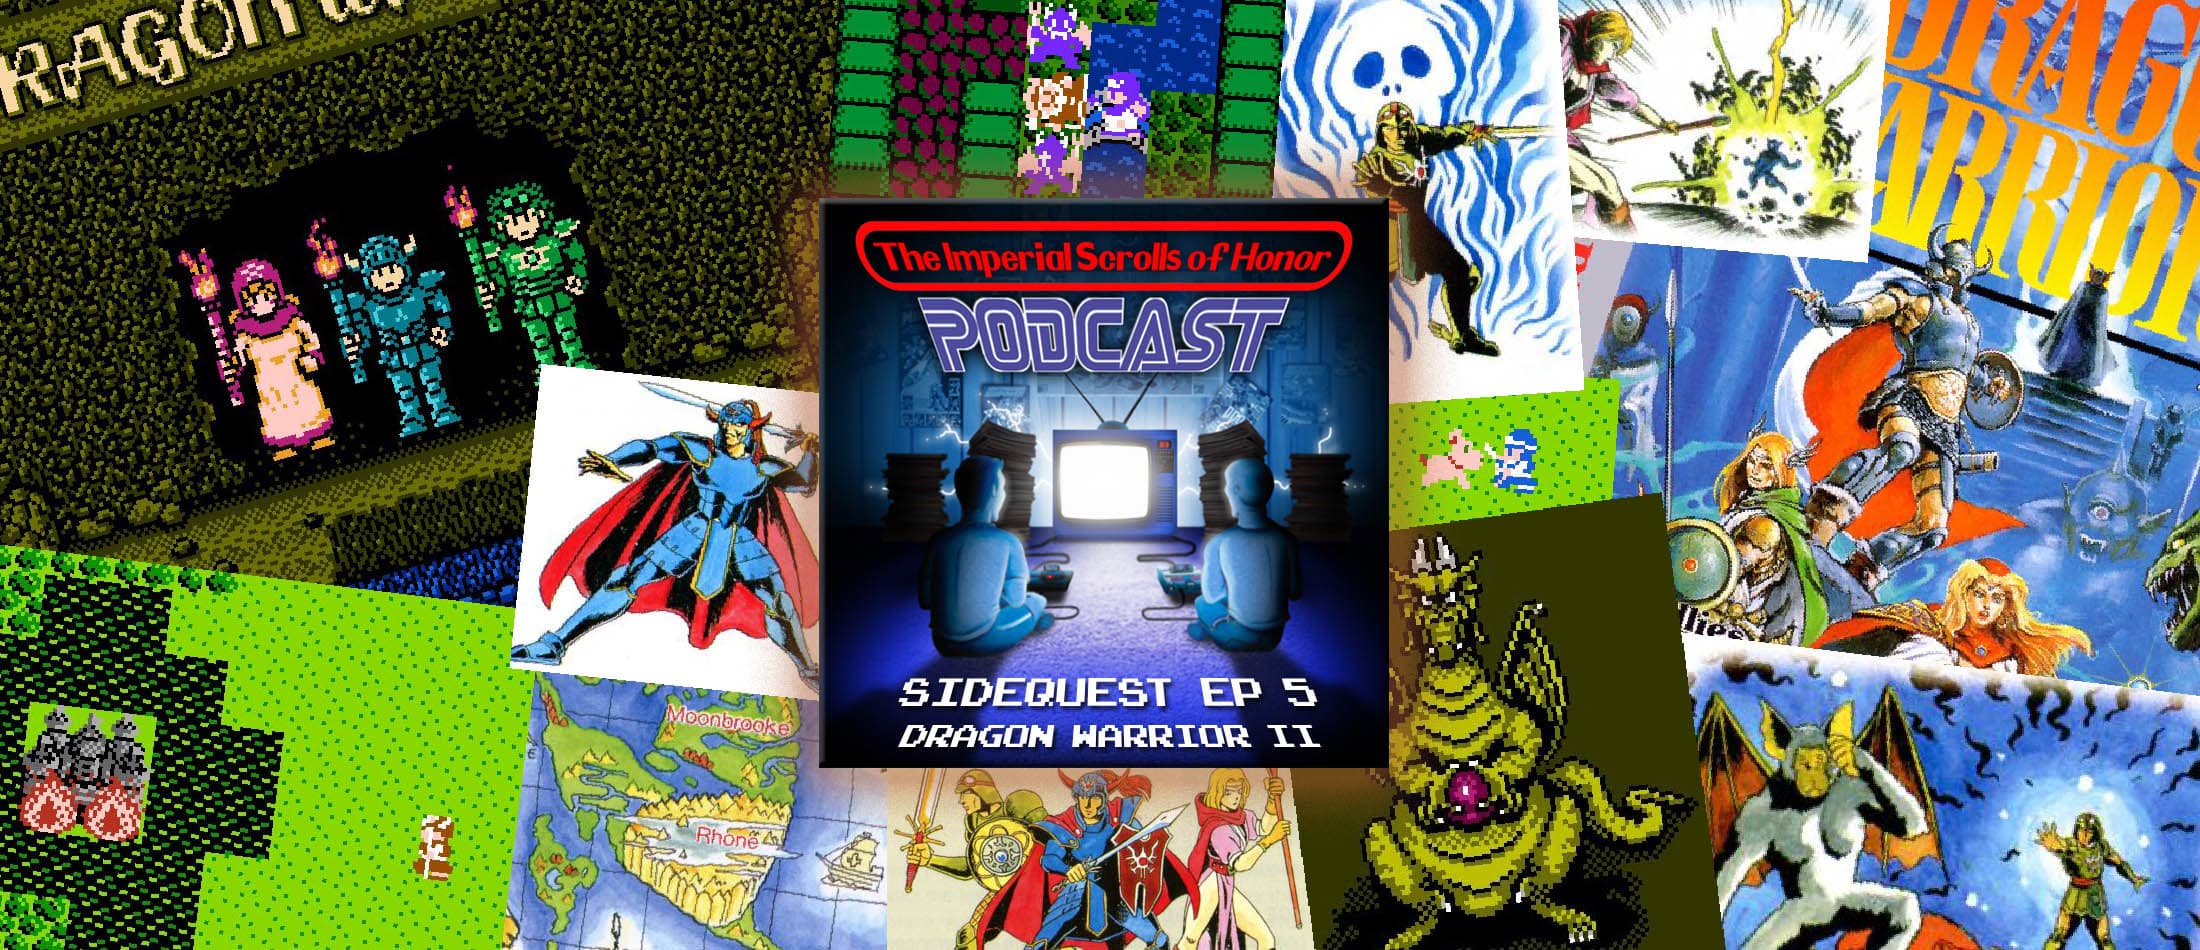 The Imperial Scrolls of Honor Podcast - SIDEQUEST: Dragon Warrior II Ep 5